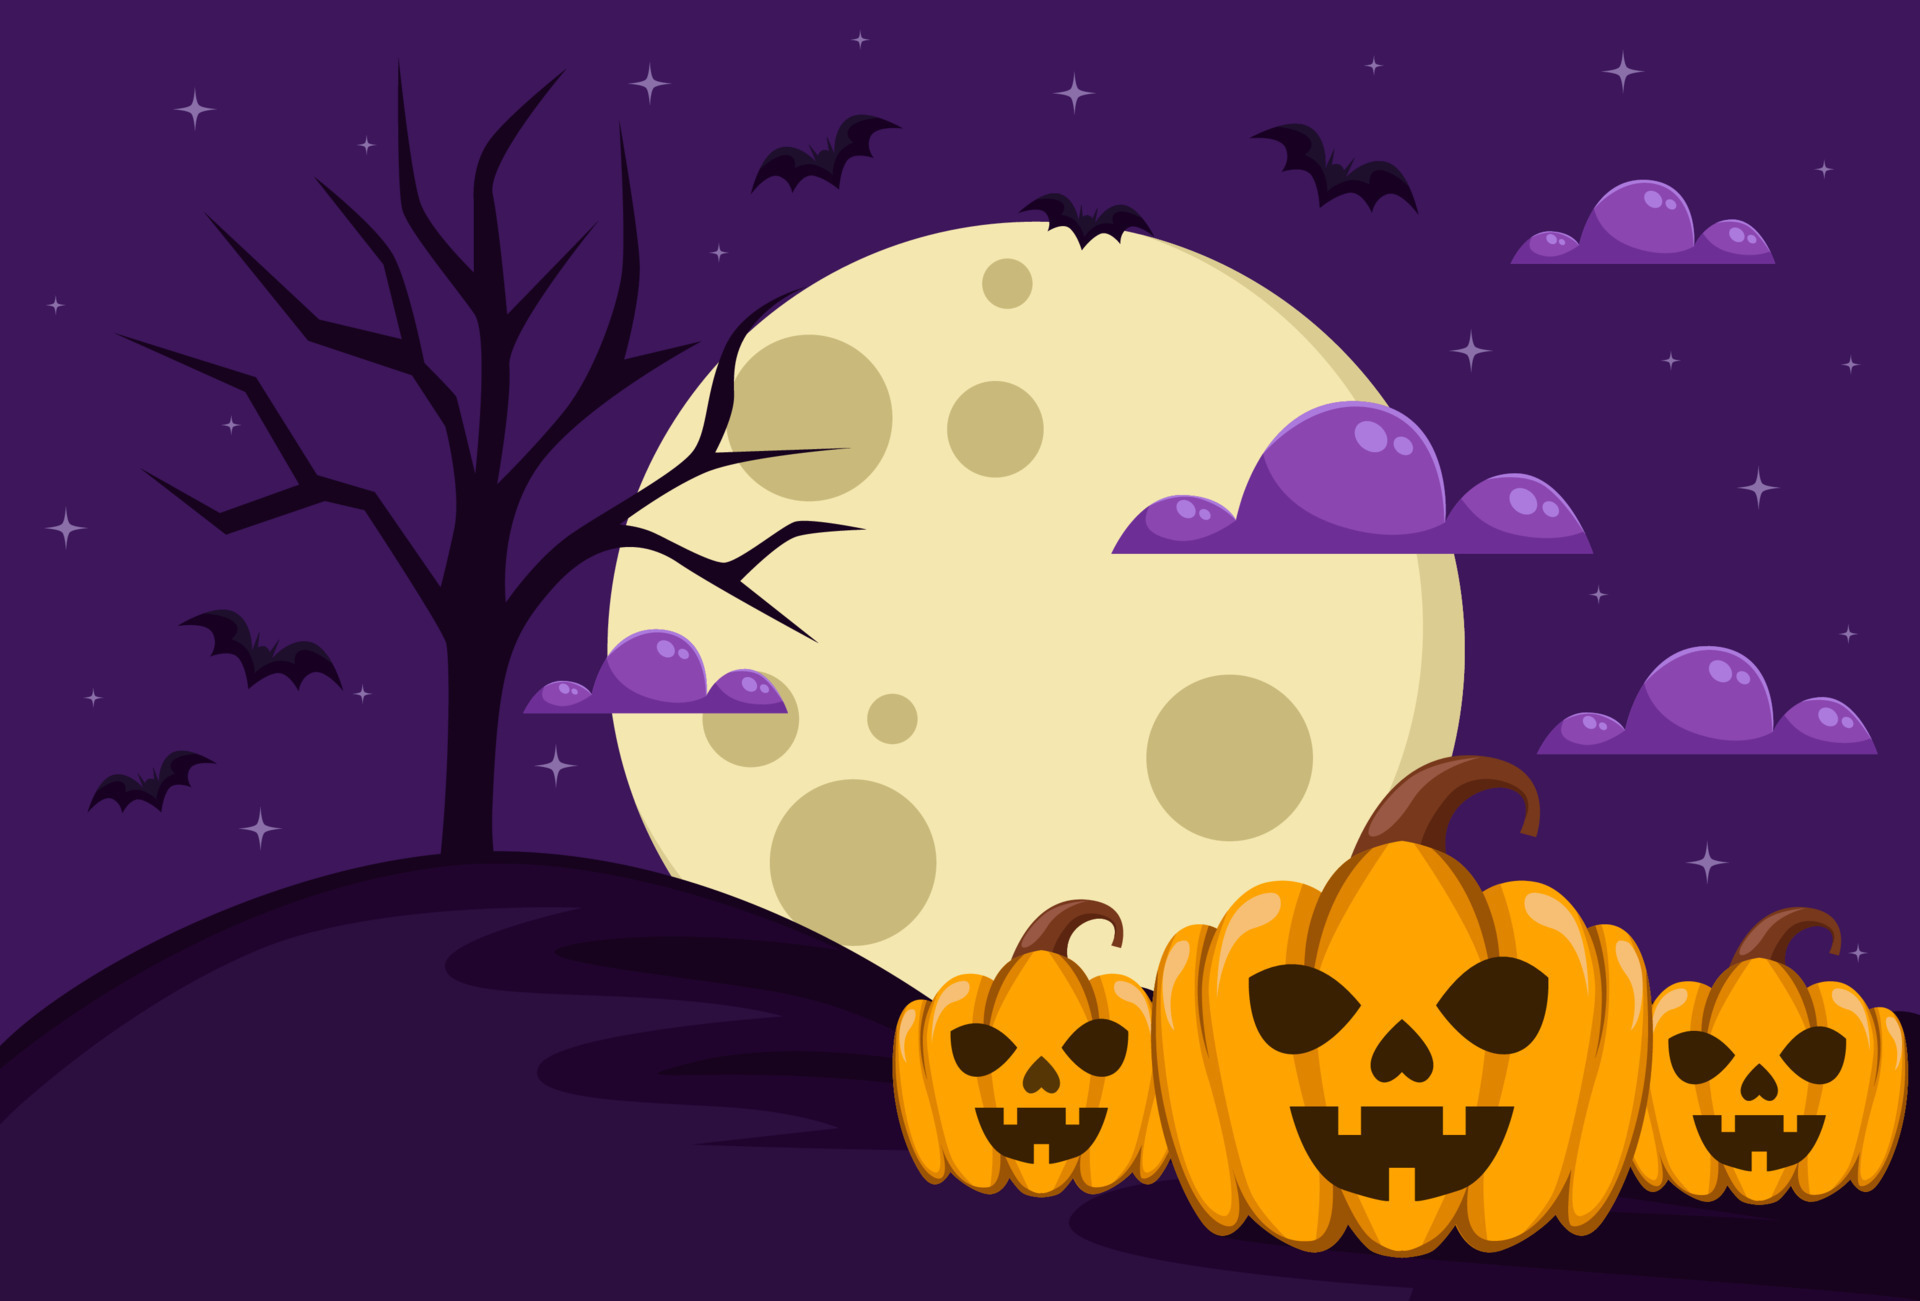 happy halloween background design in purple color for covers, banners and more